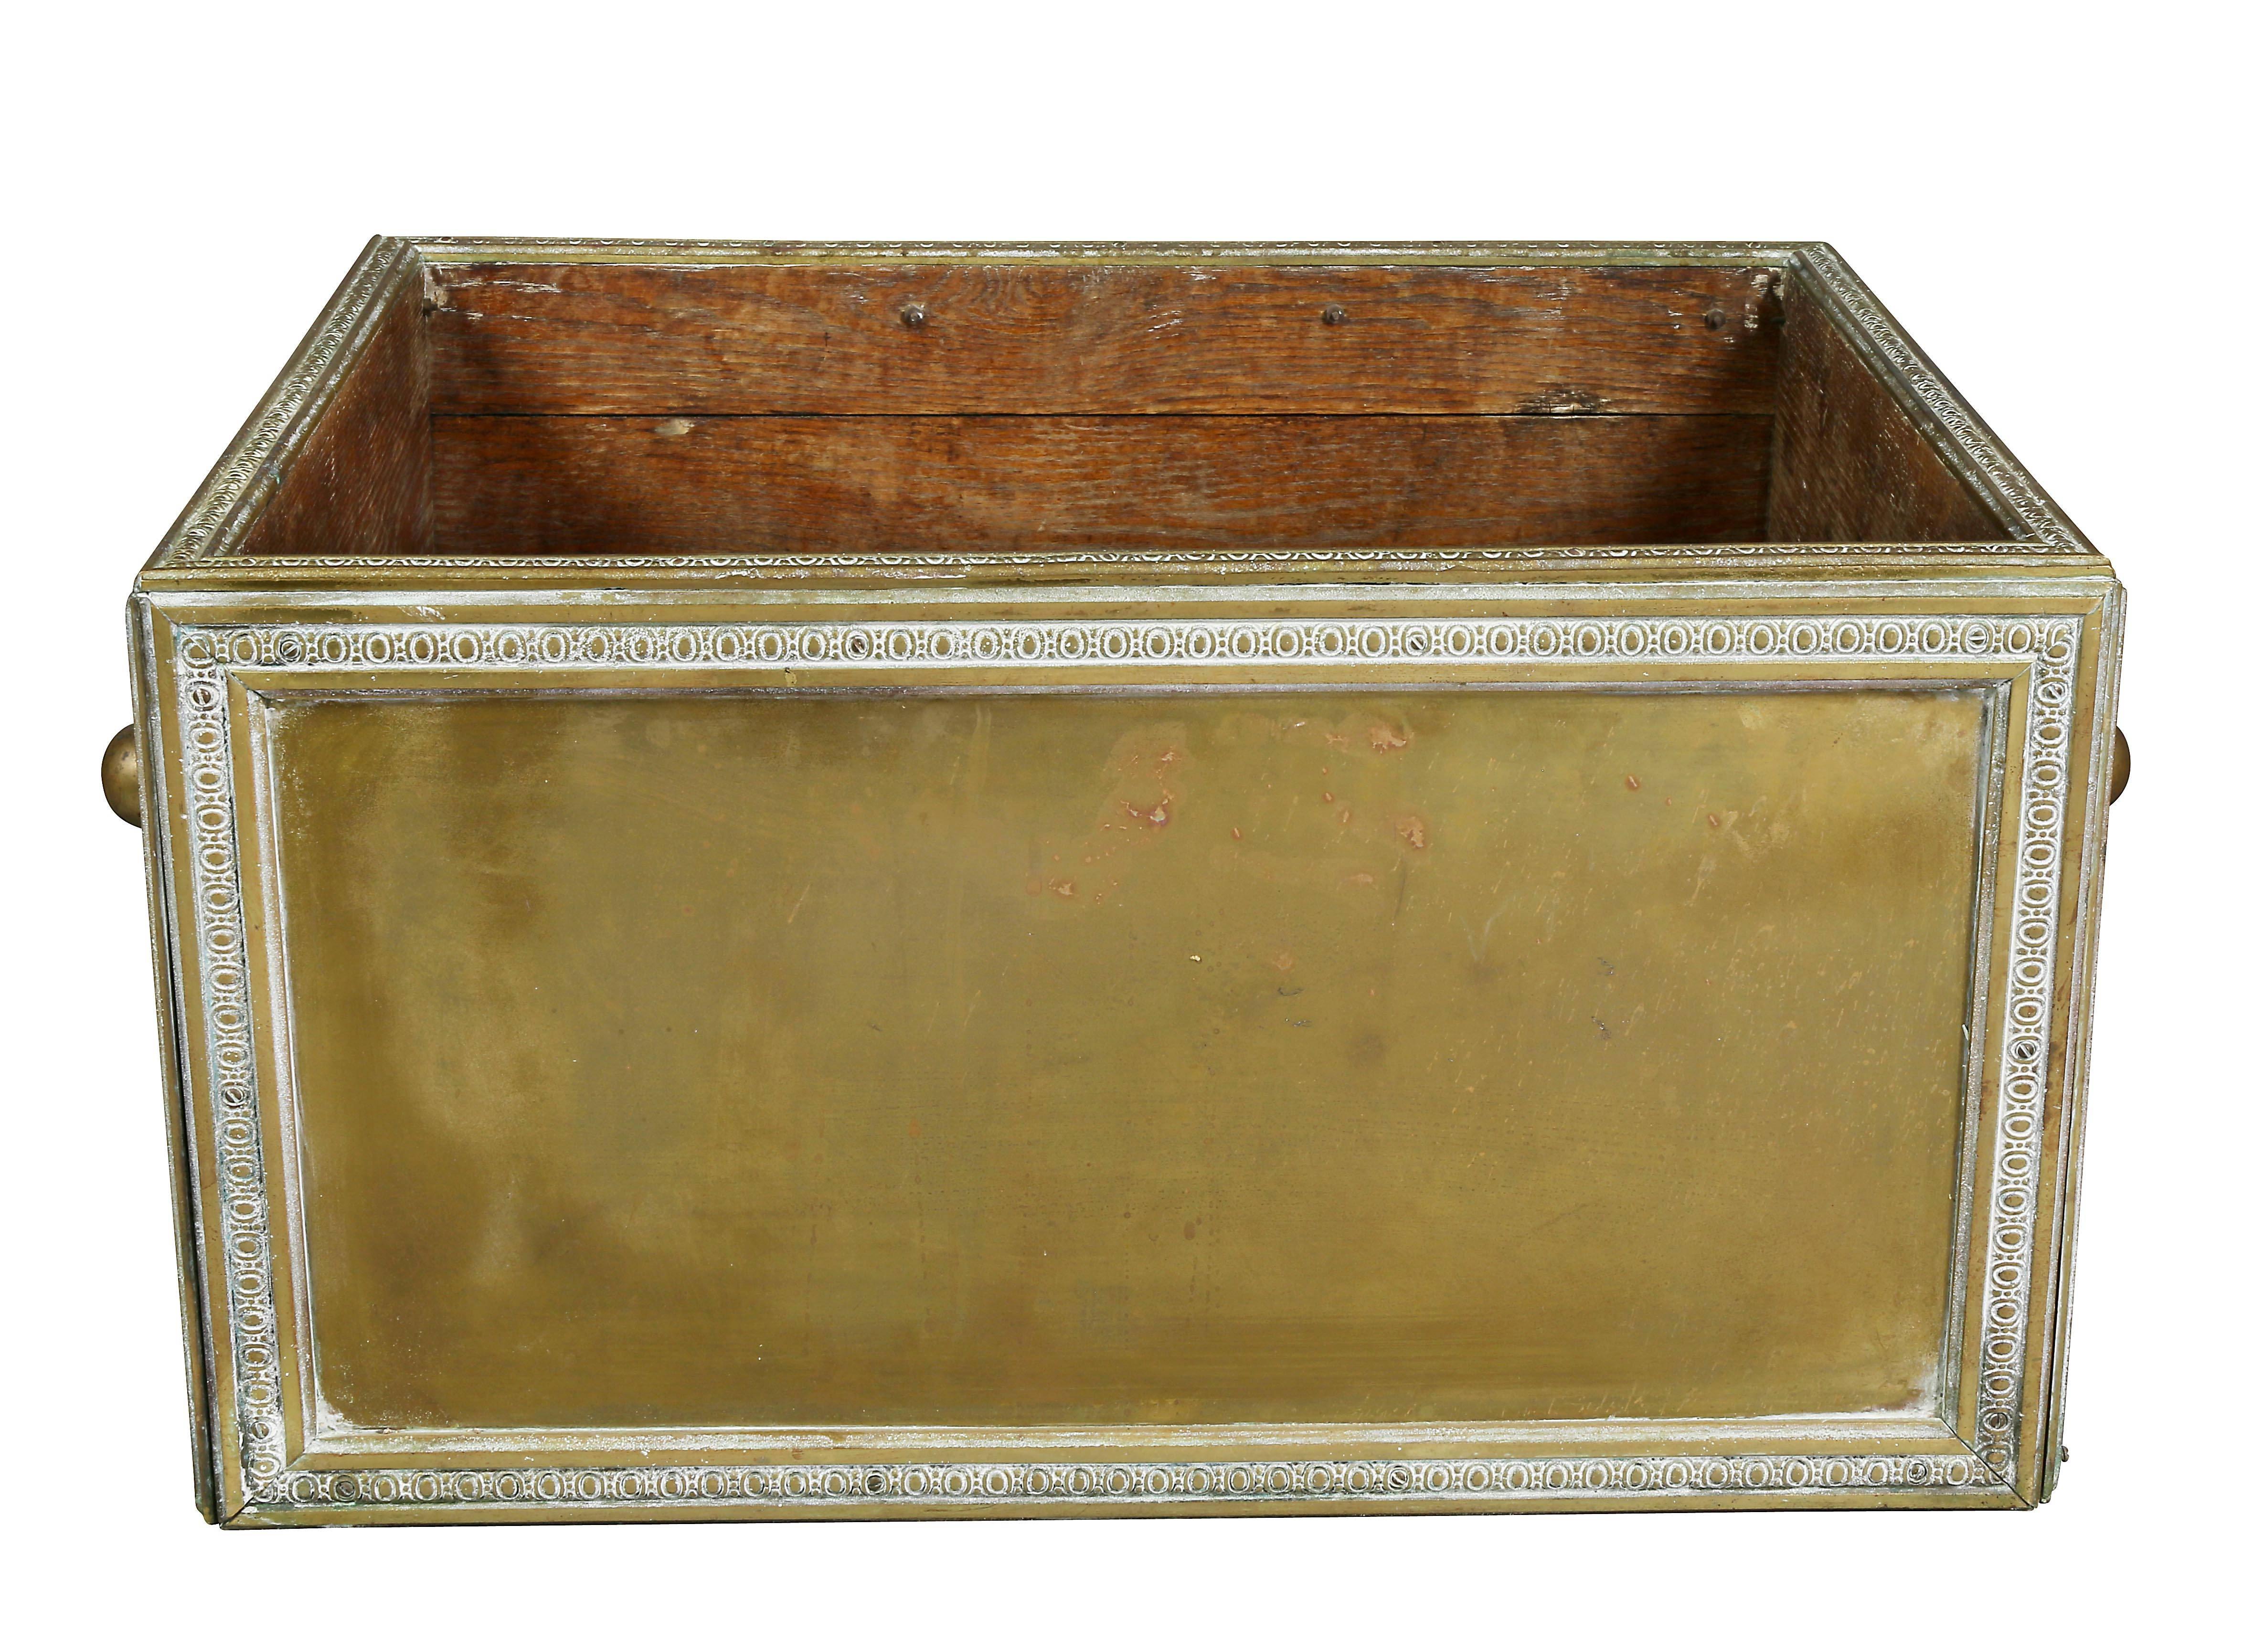 Rectangular with handles at each end. Cast decorative edging to the corners.